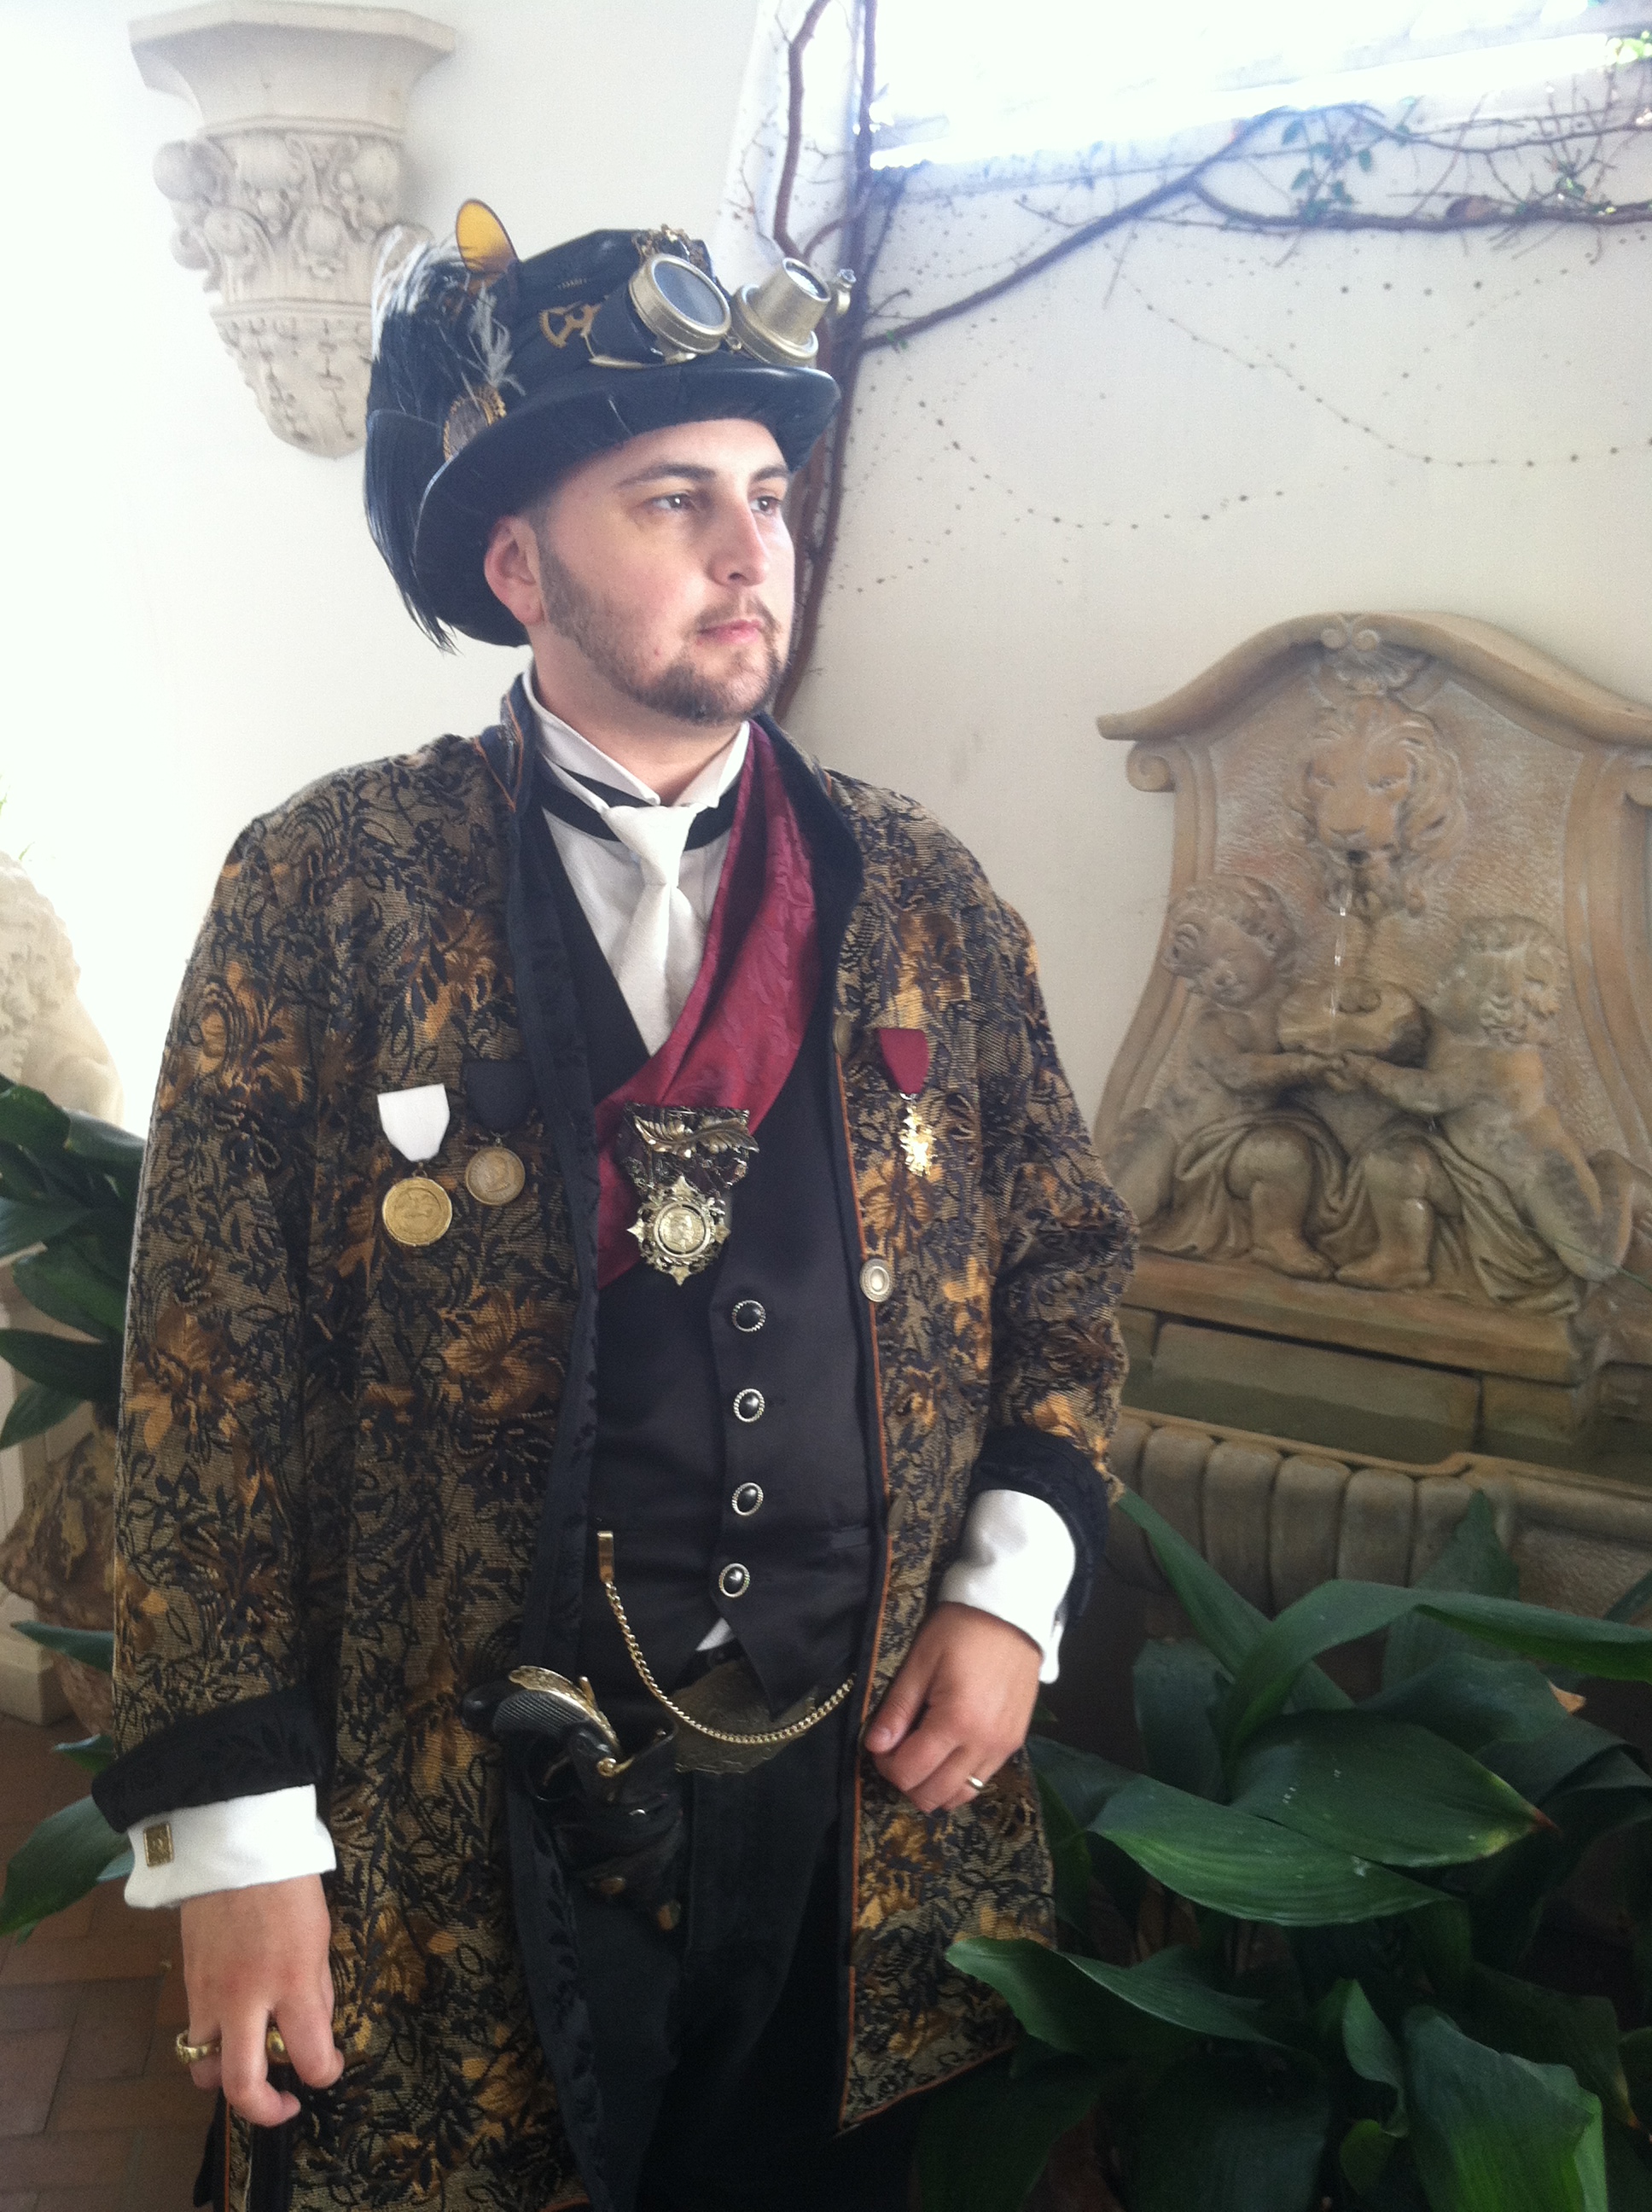 Valiant as Don Miguel, Count of Coronado and Airship Building Tycoon at the Gaslight Gathering 2014 in Fashion Valley, CA (May 2014)